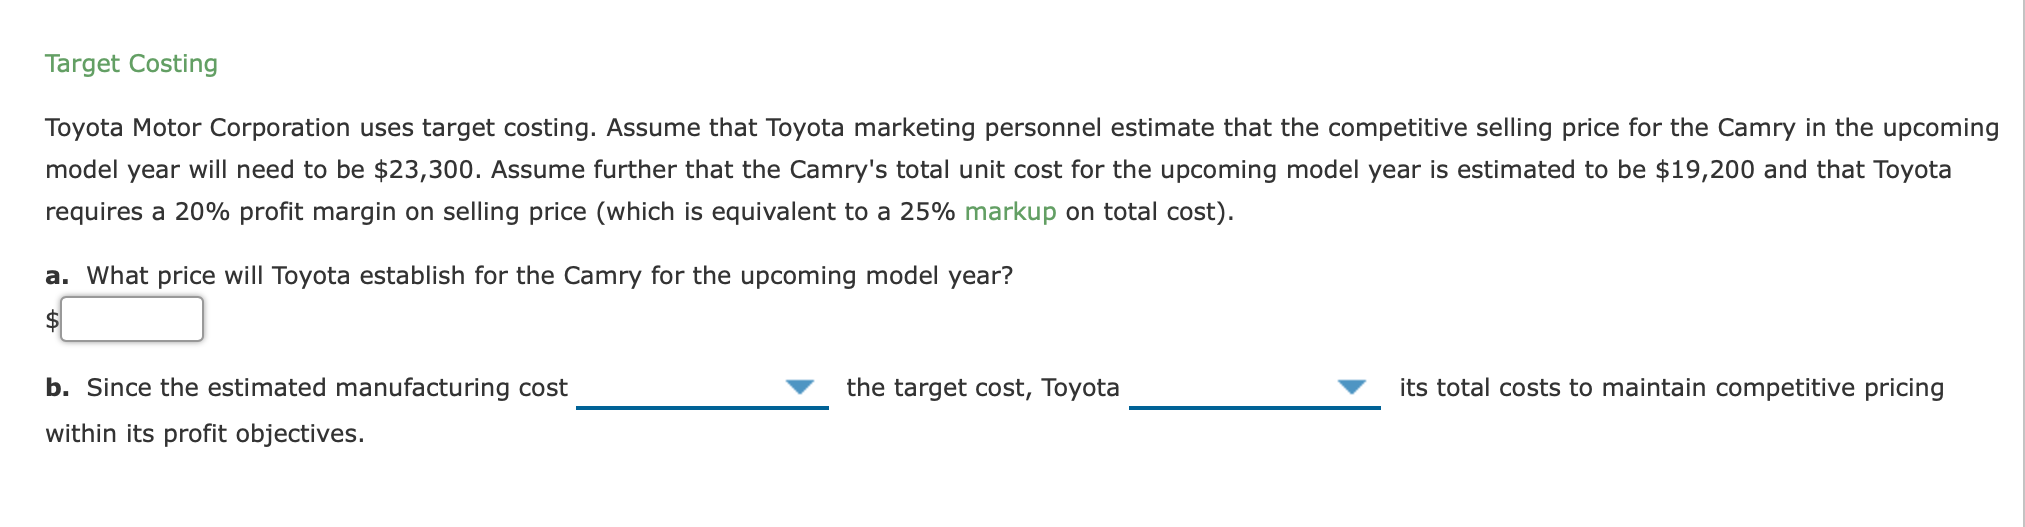 target costing toyota case study